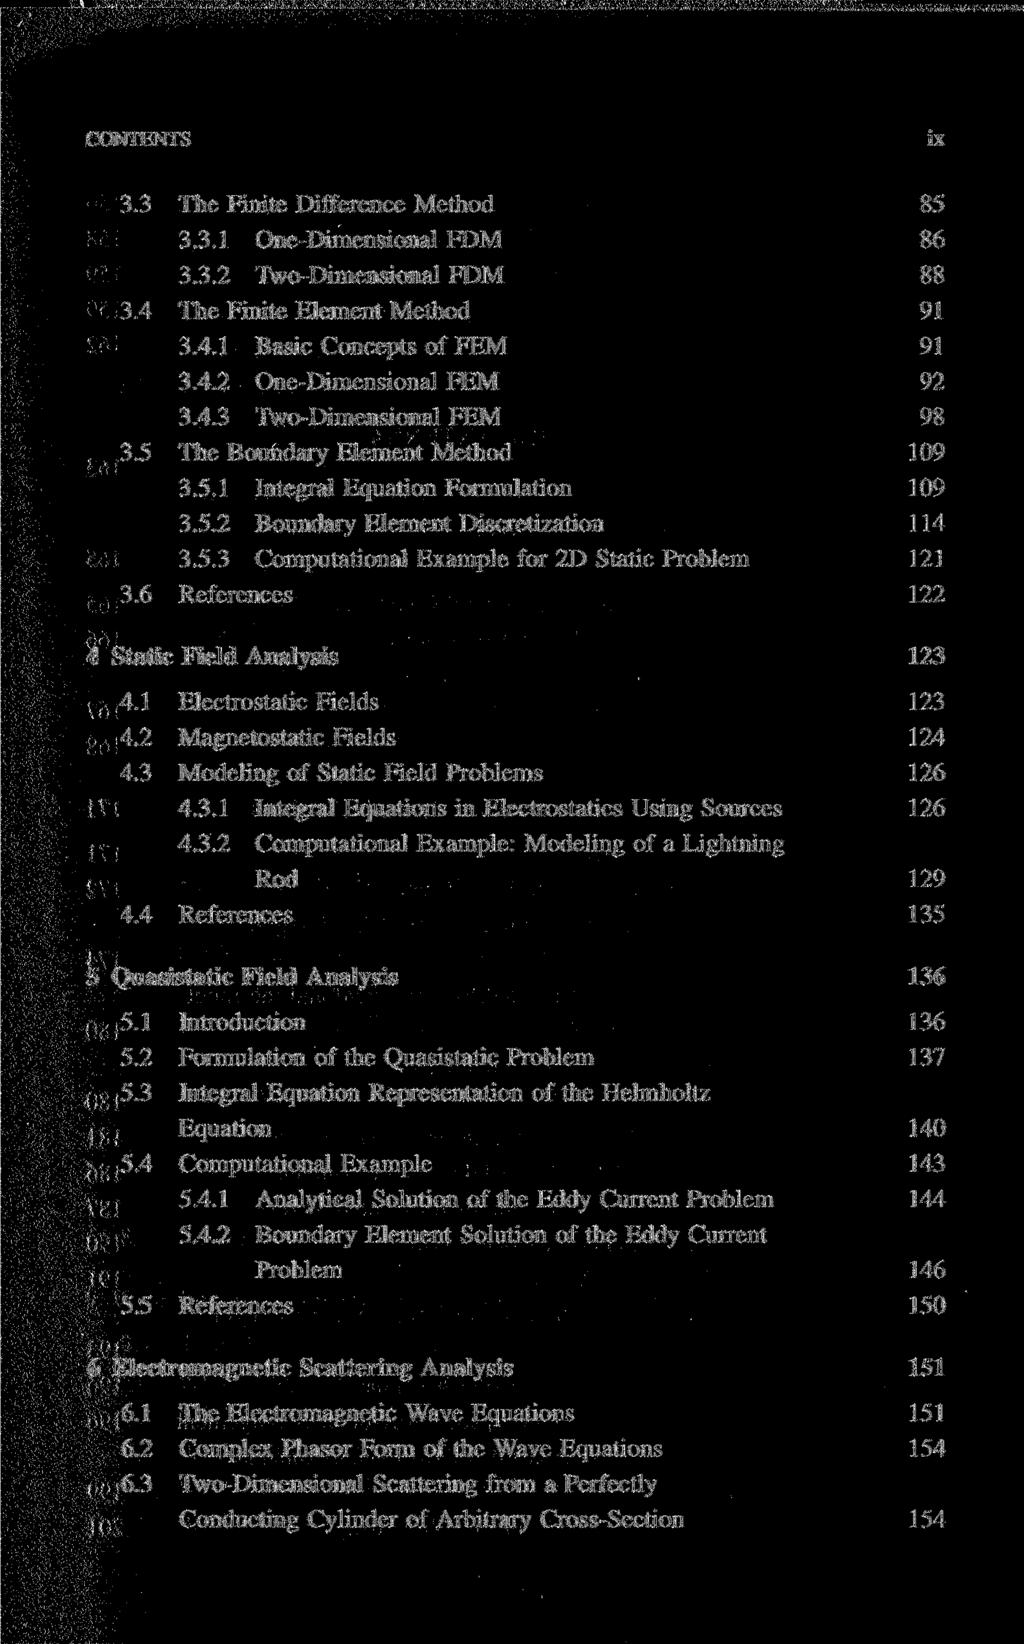 CONTENTS ix 3.3 The Finite Difference Method 85 3.3.1 One-Dimensional FDM 86 3.3.2 Two-Dimensional FDM 88 3.4 The Finite Element Method 91 3.4.1 Basic Concepts of FEM 91 3.4.2 One-Dimensional FEM 92 3.